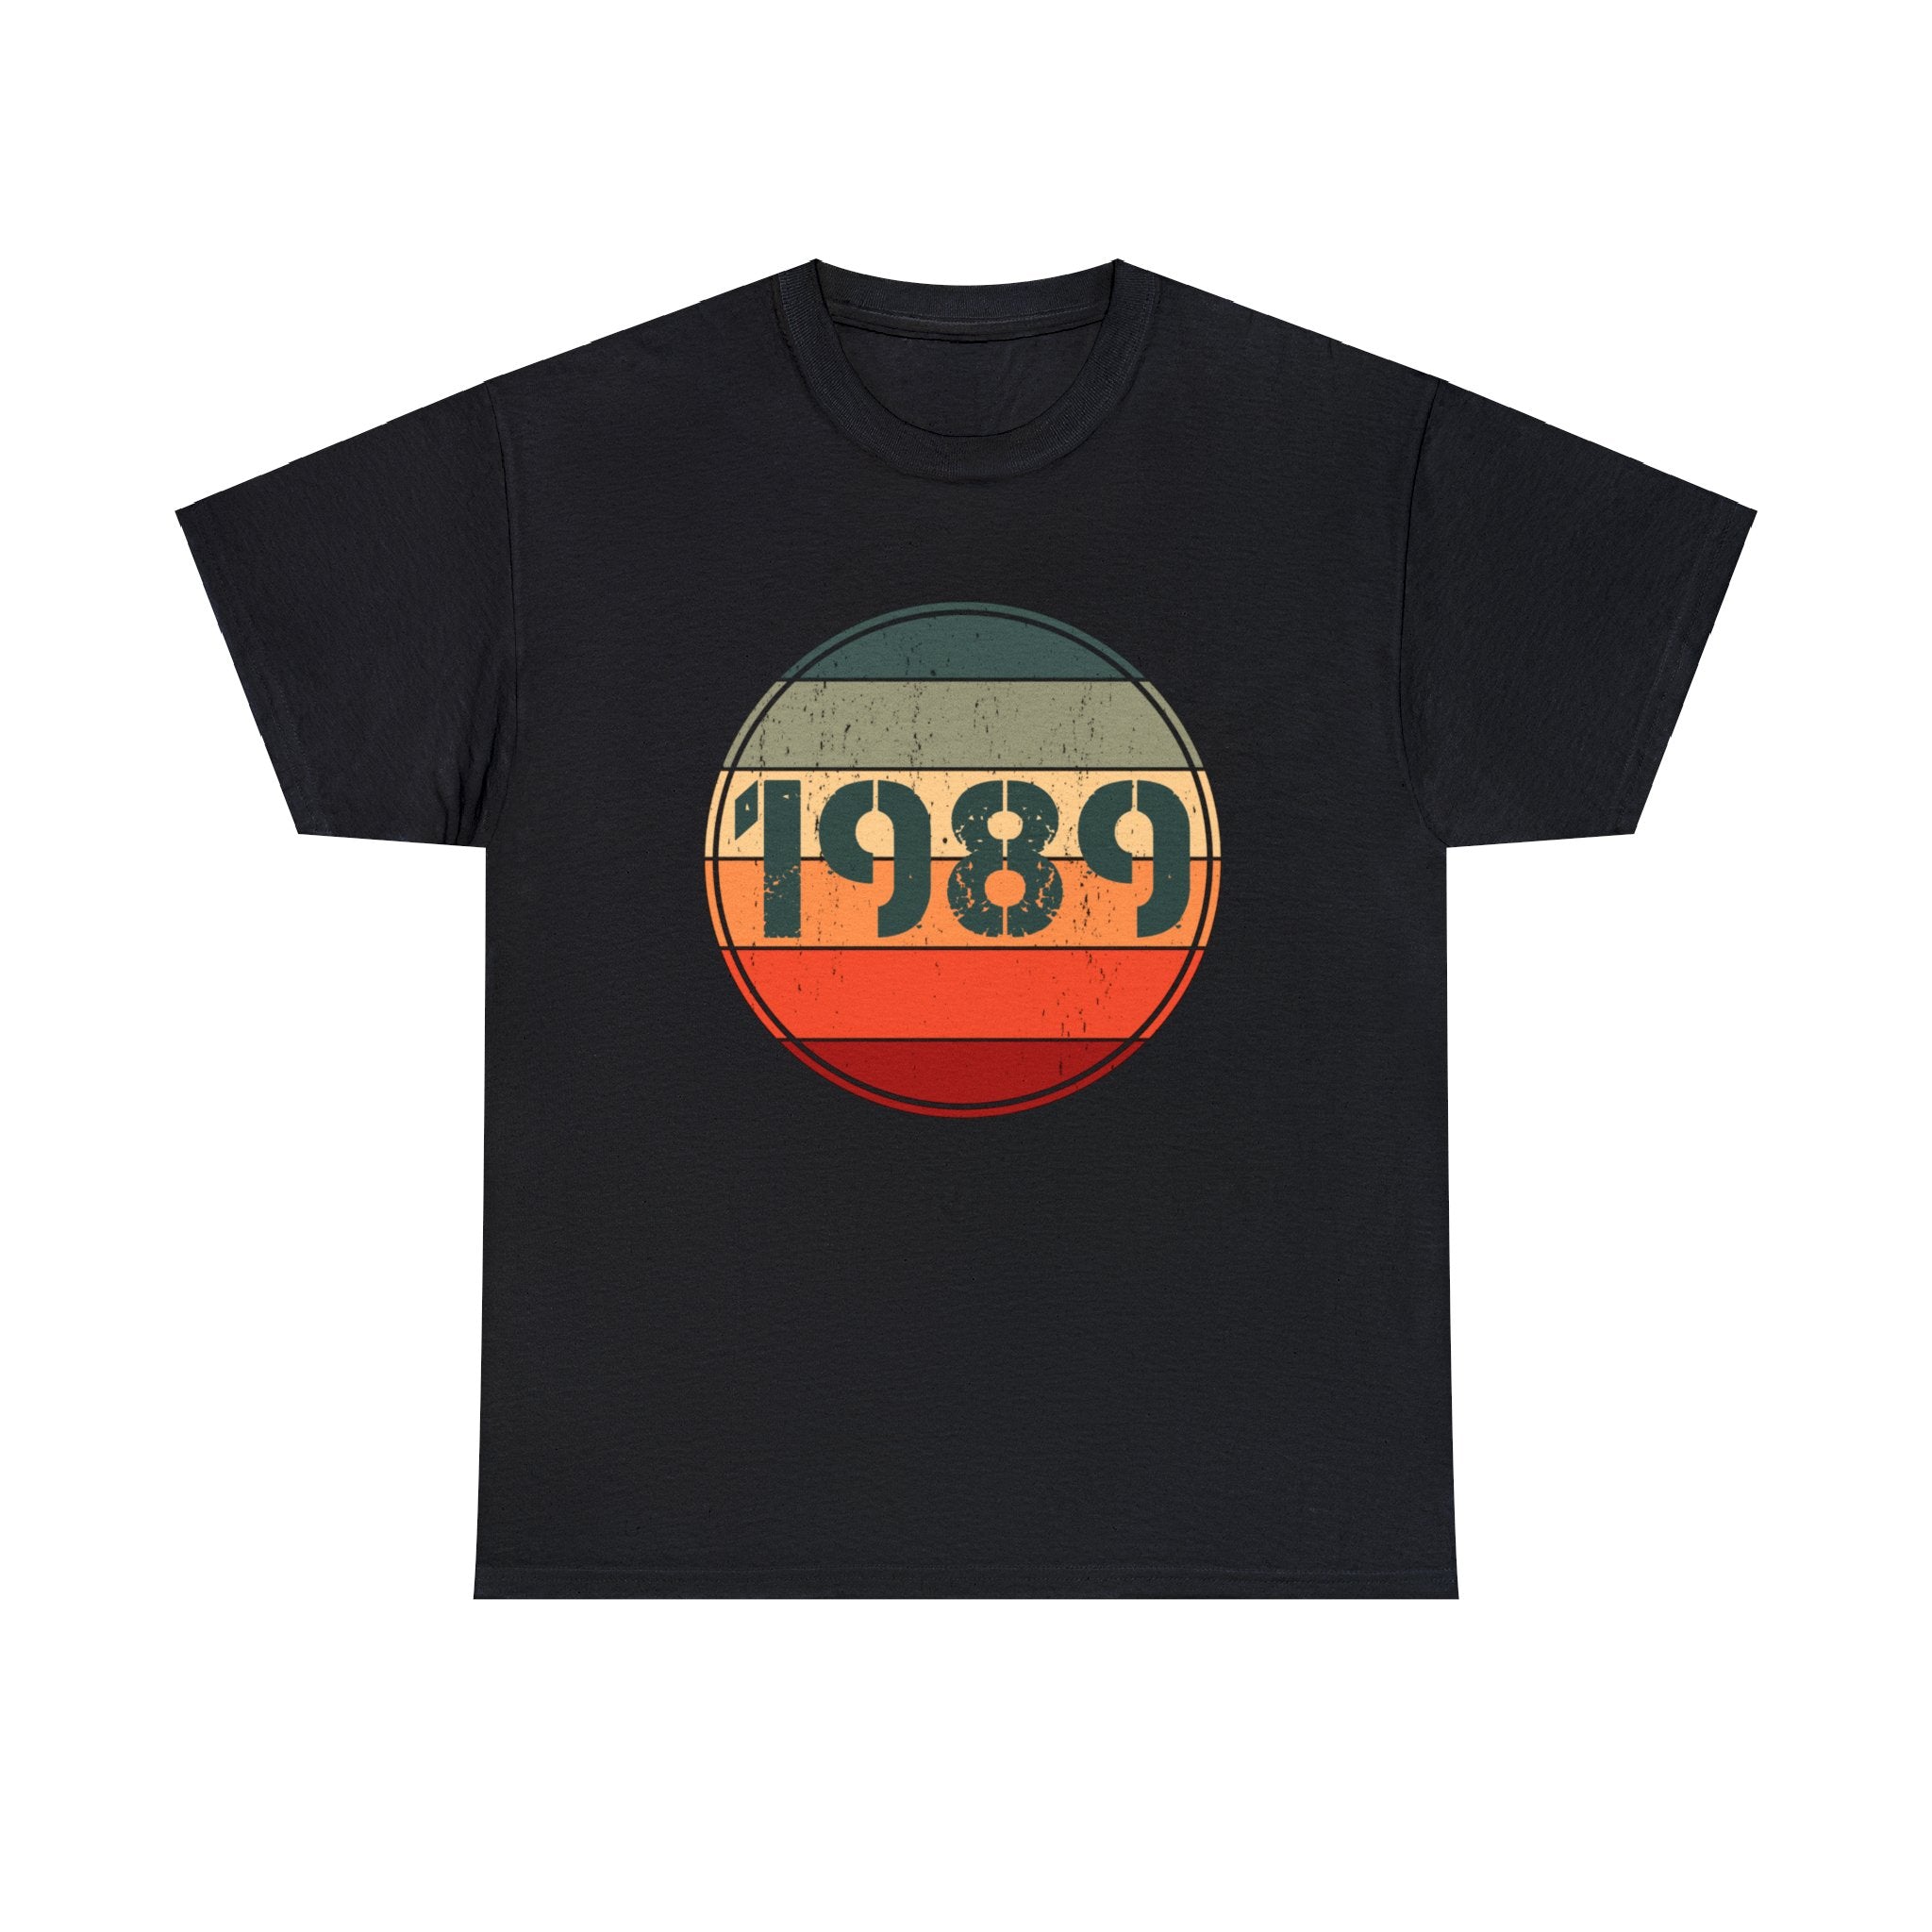 Retro 1989 Birthday Gift 1989 Man Vintage Humour Shirts for Men Plus Size Big and Tall